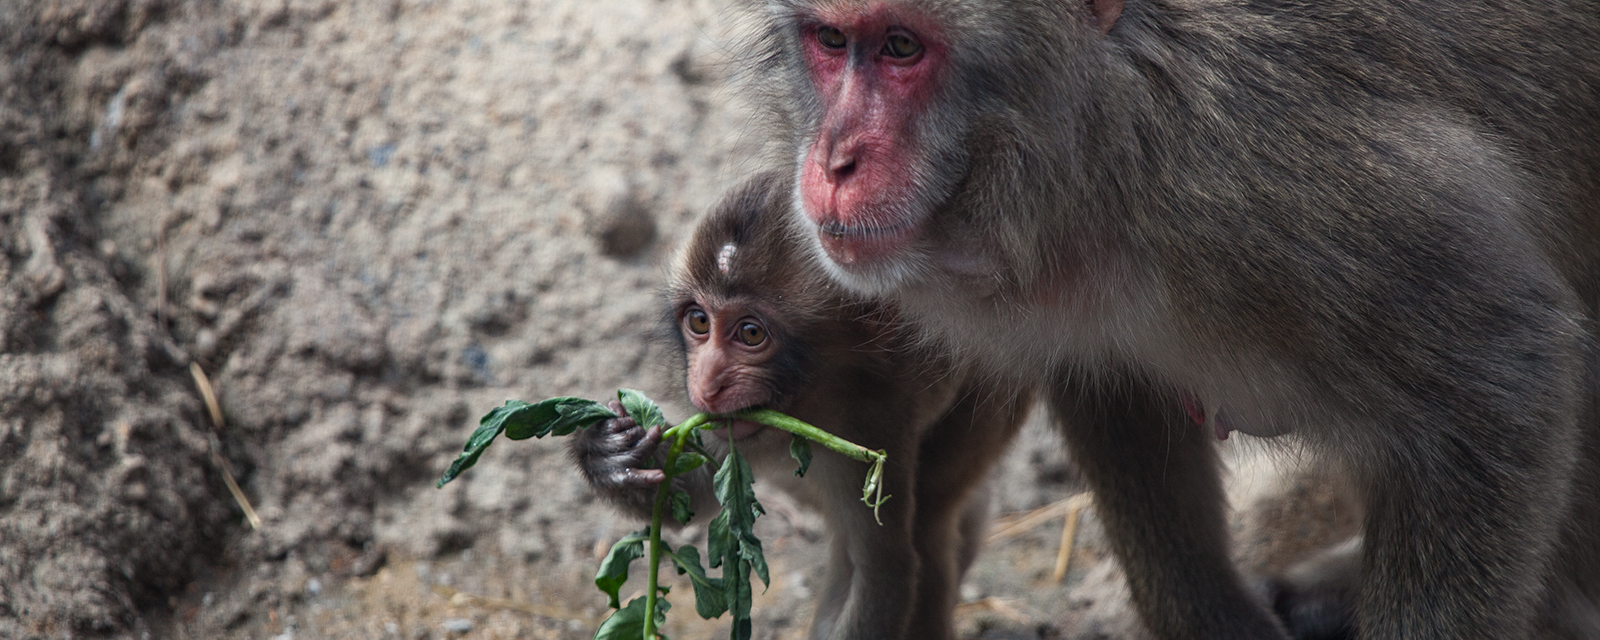 Two Japanese macaques in exhibit